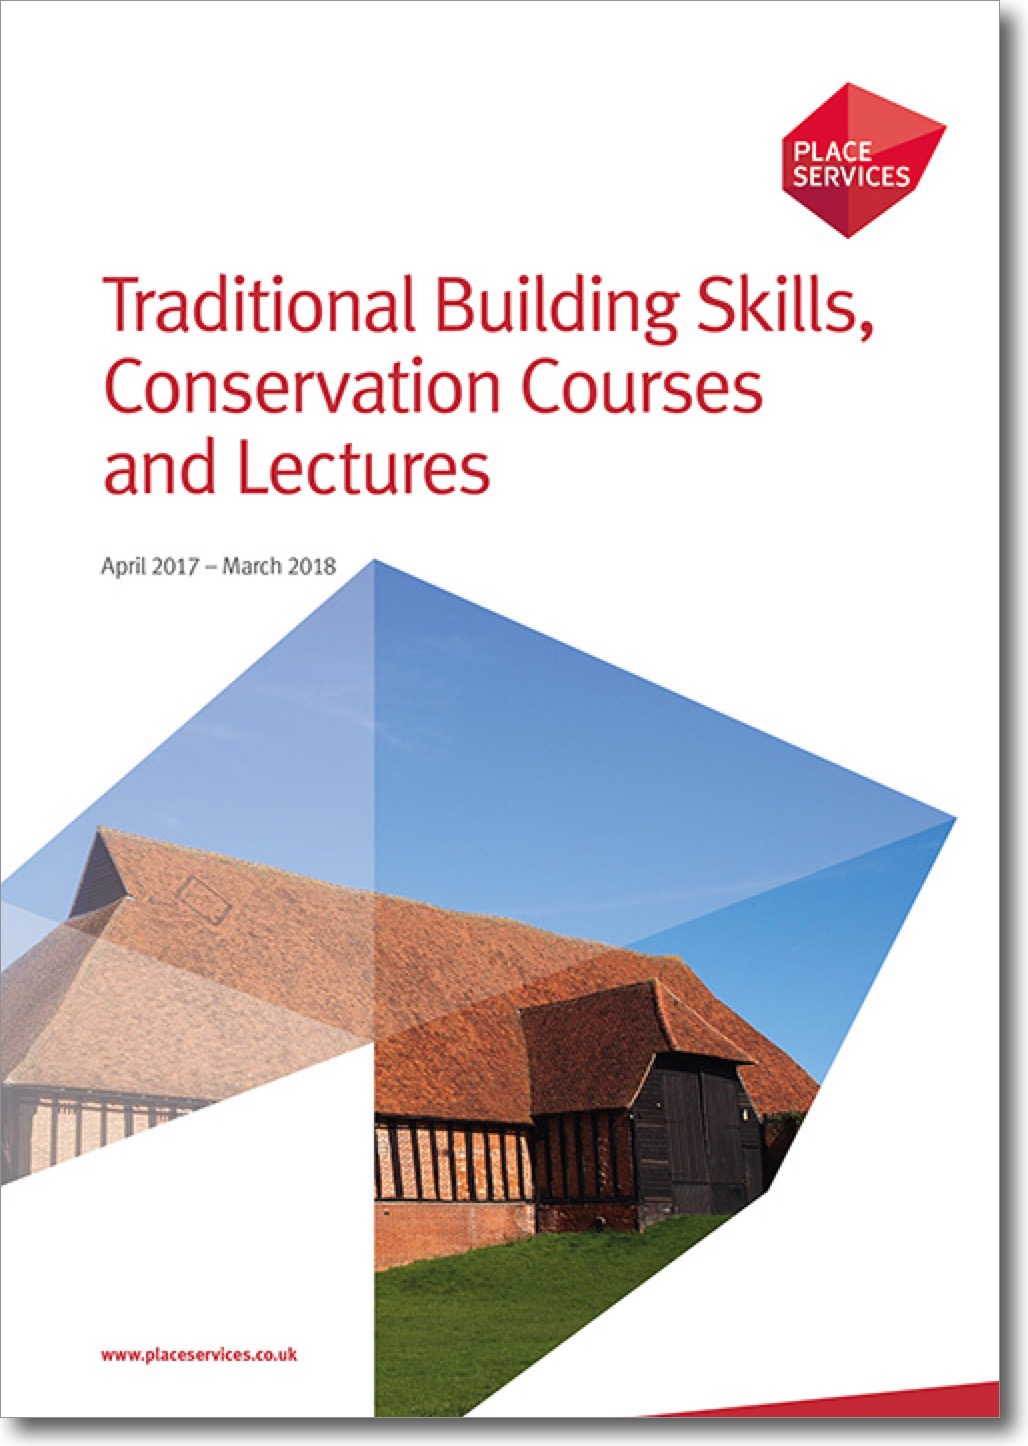 Traditional Building Skills, Conservation Courses and Lectures